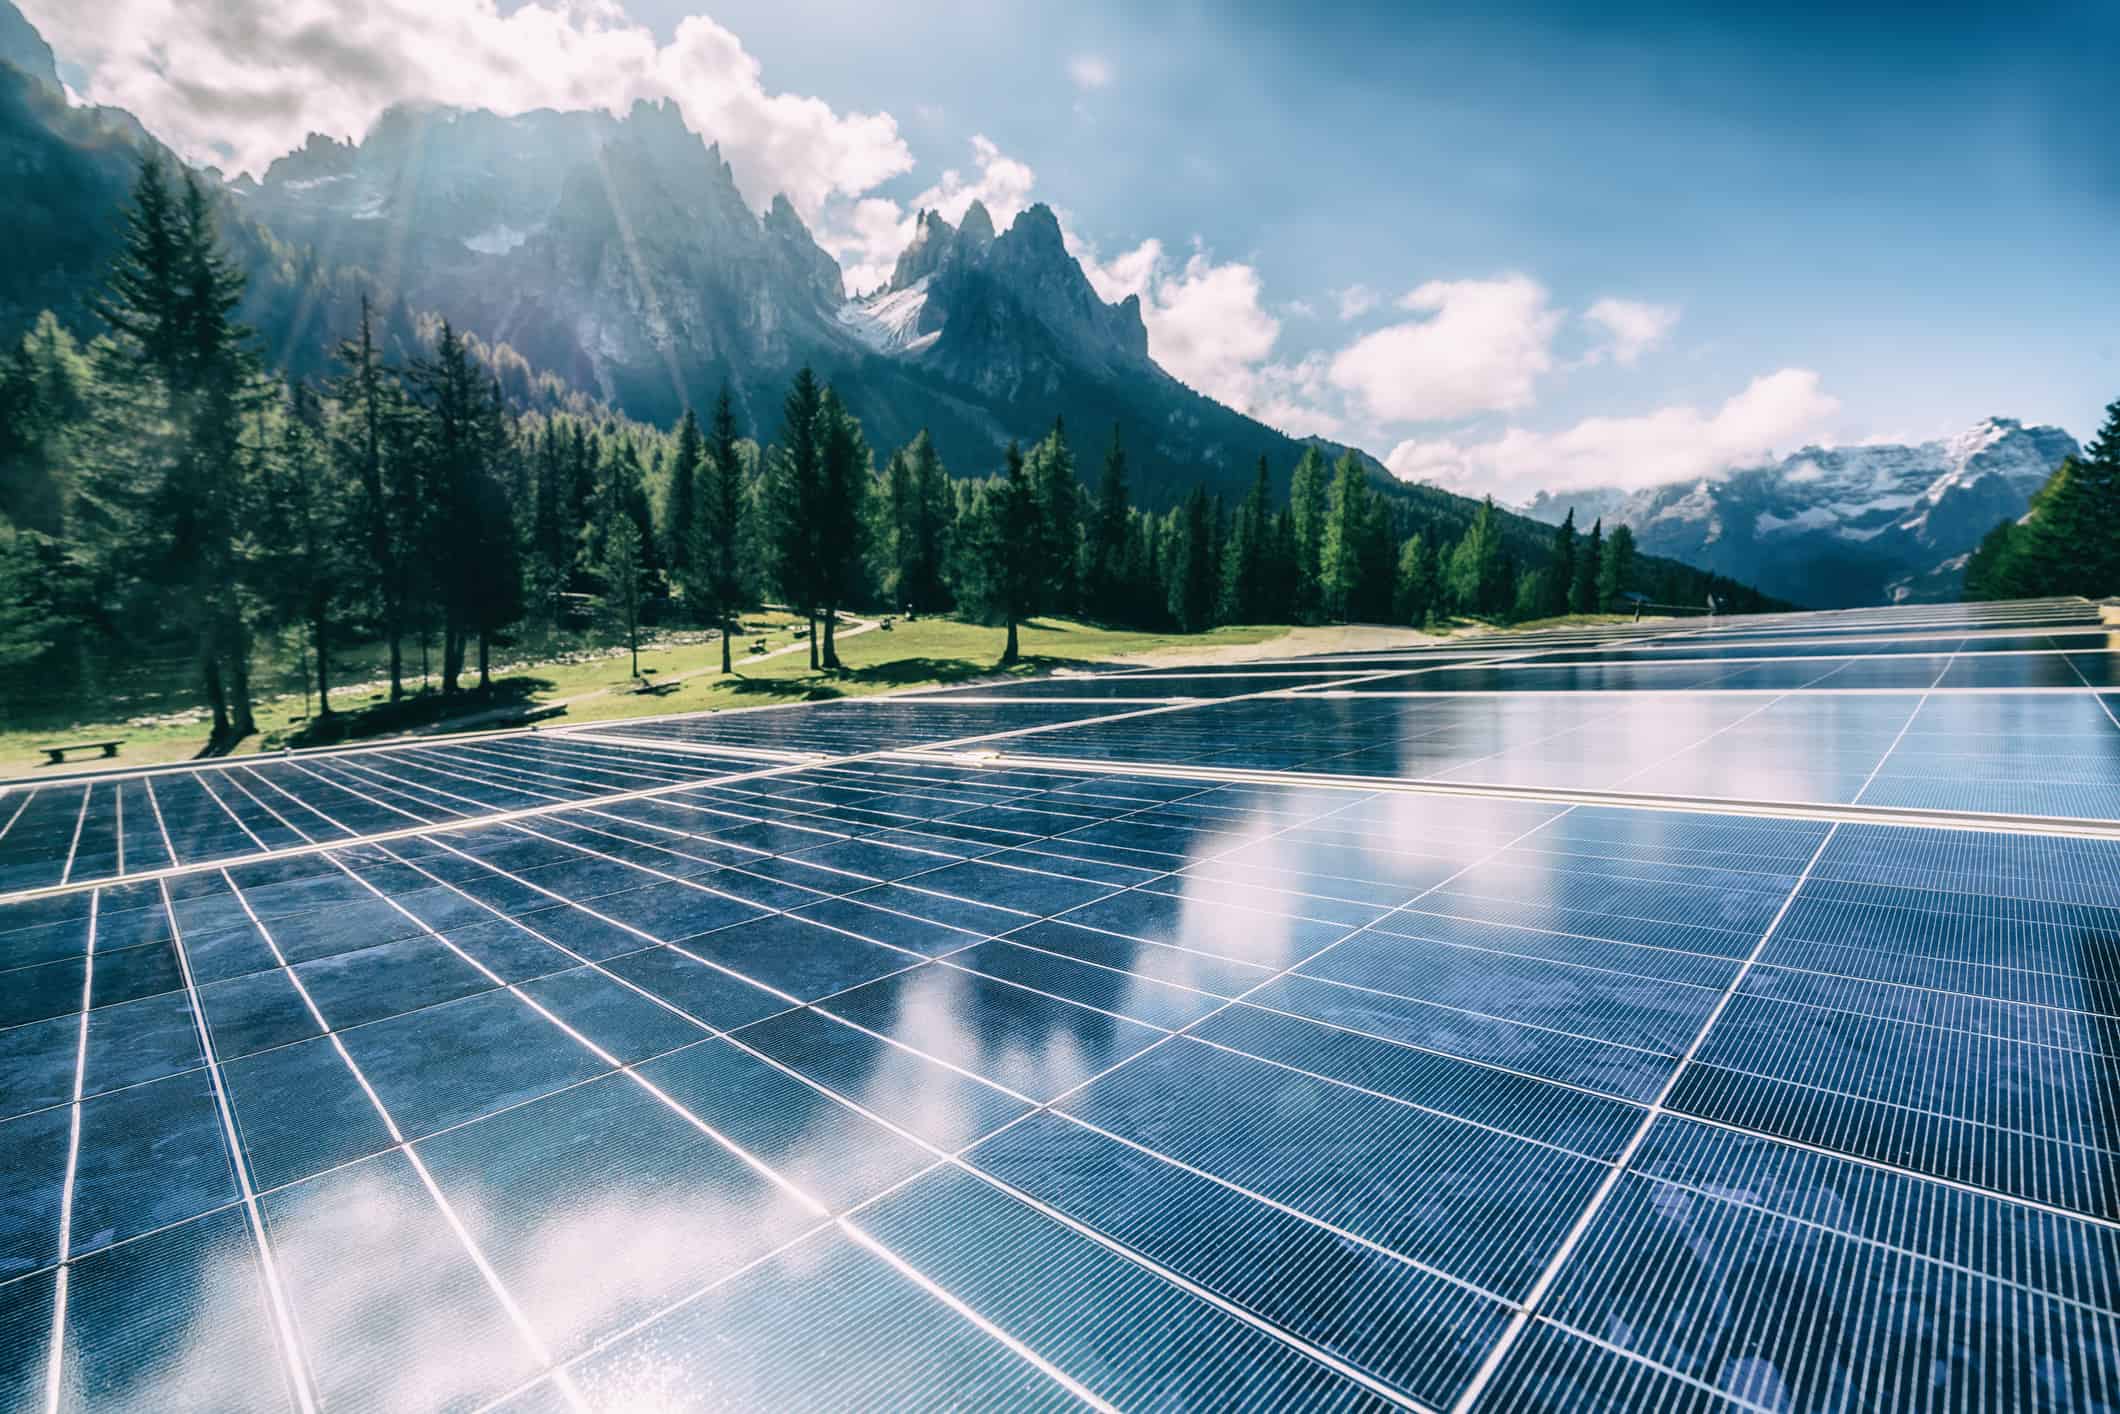 A solar cell panel generates power in a country mountain landscape.